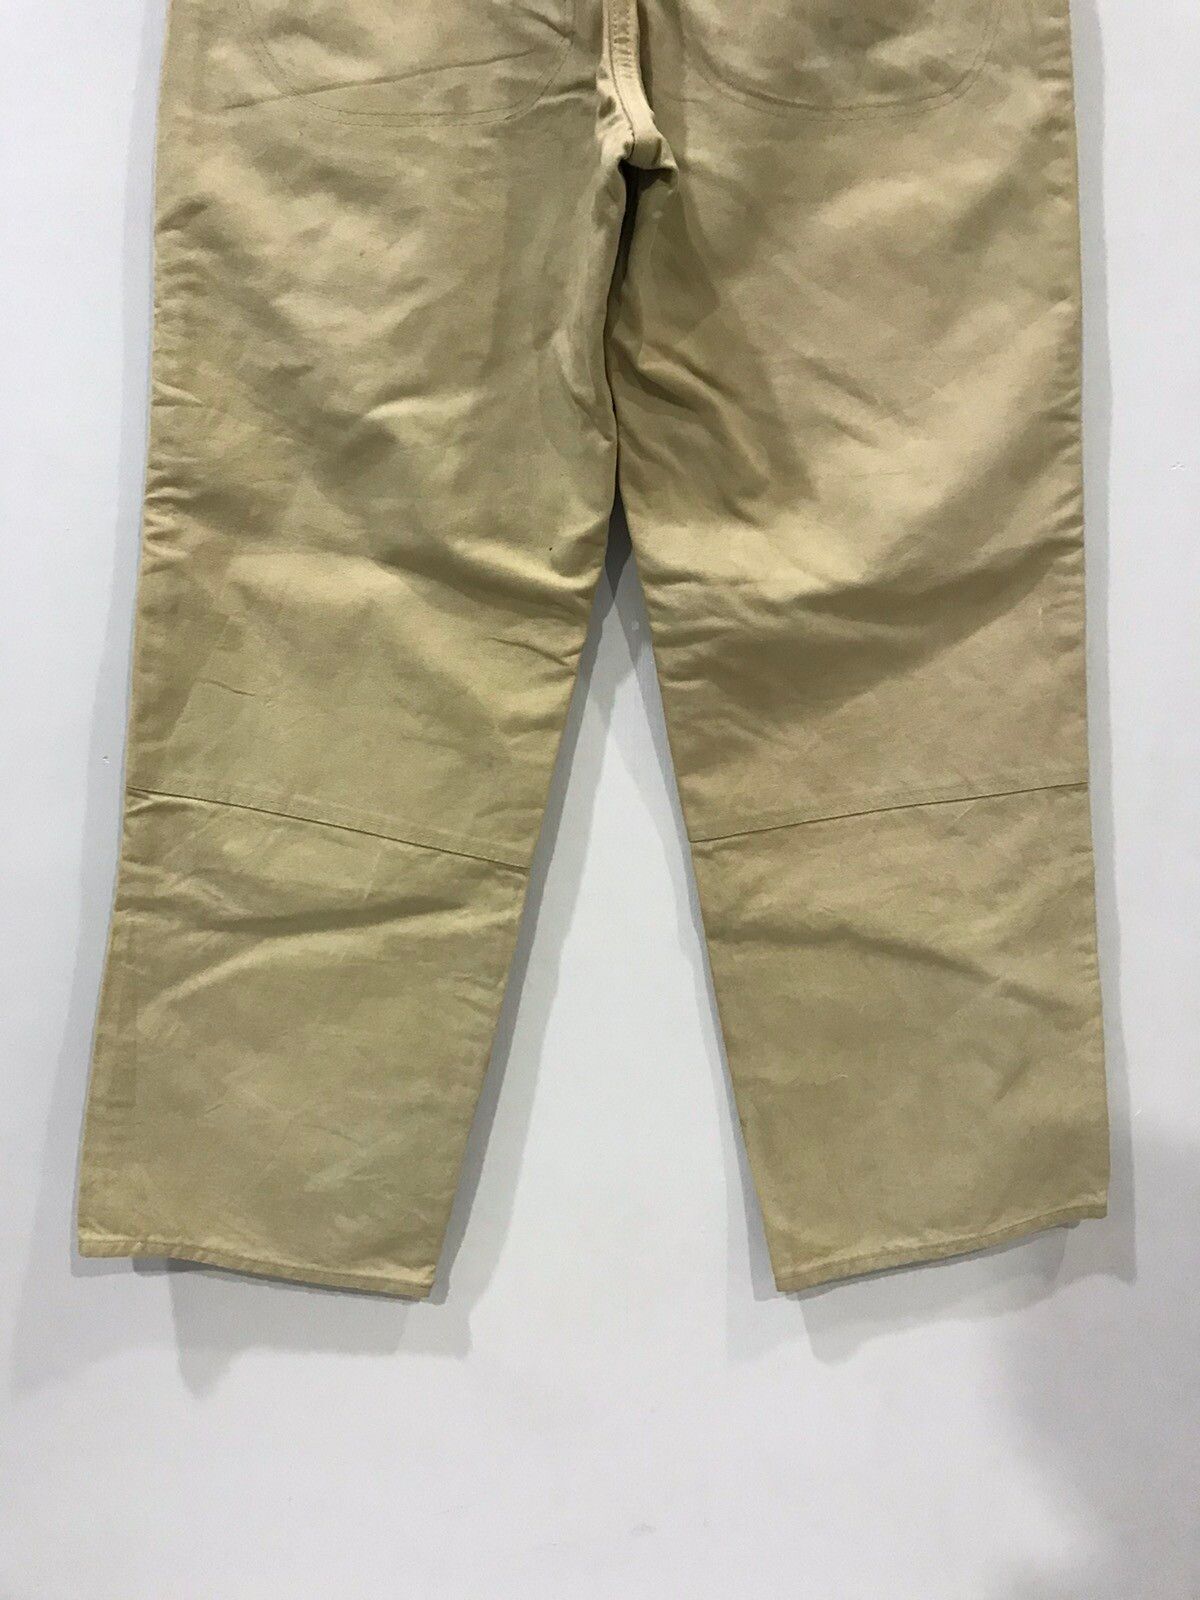 Vintage FILSON Made in USA Military Sturdy Pant - 14